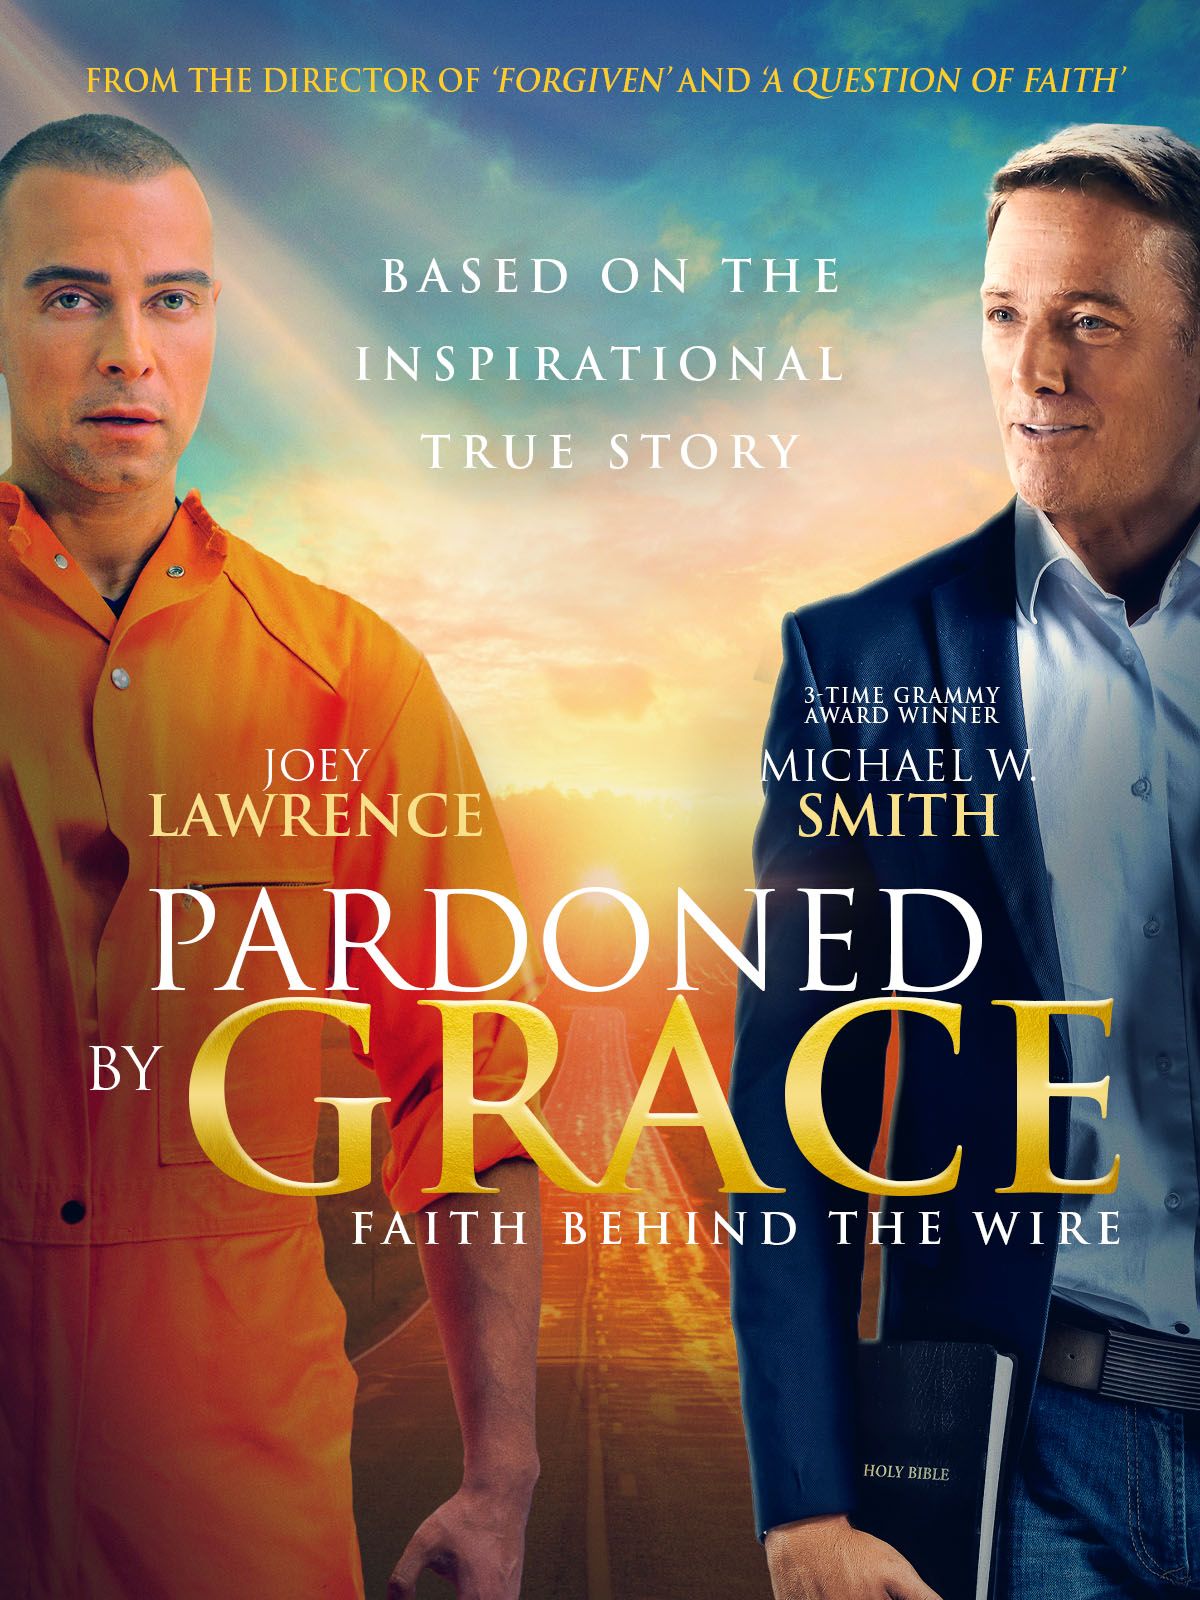 Keyart for the movie Pardoned by Grace